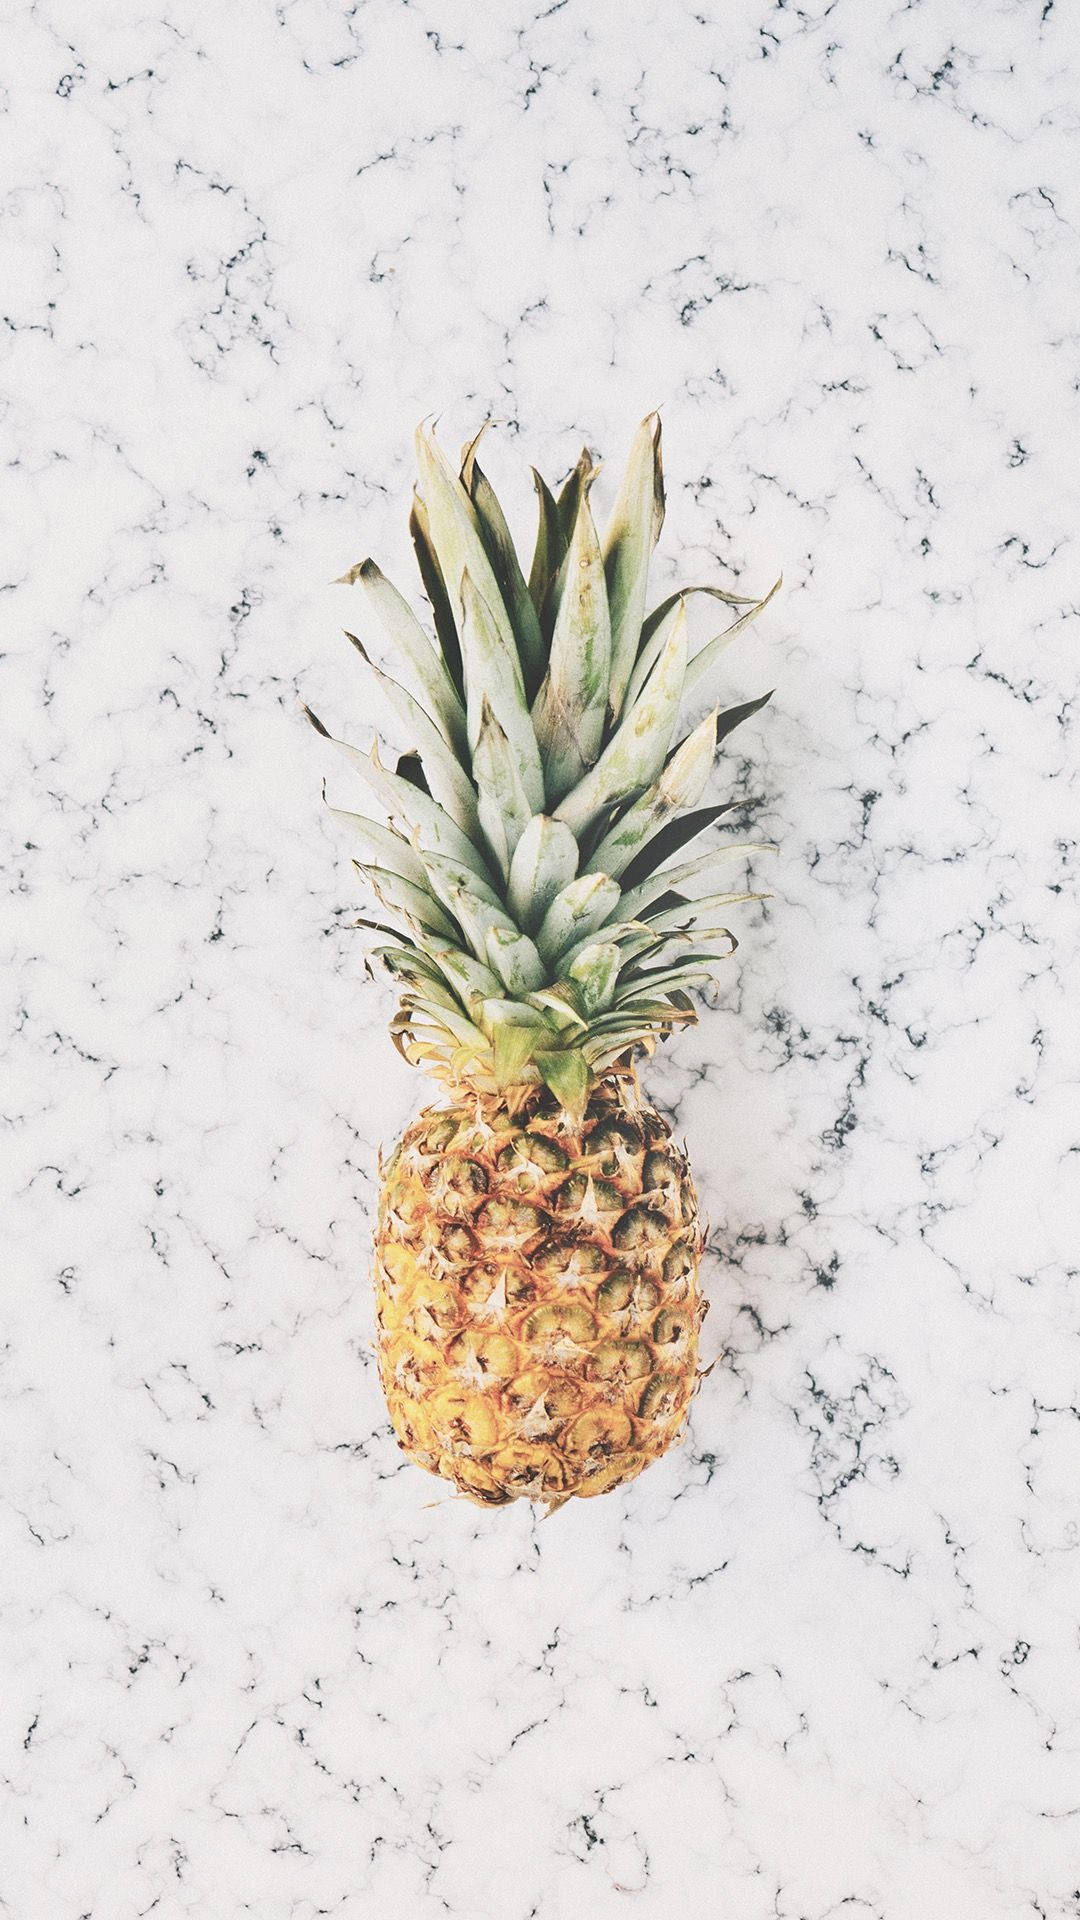 Top Pineapple Wallpaper Full HD K Free To Use